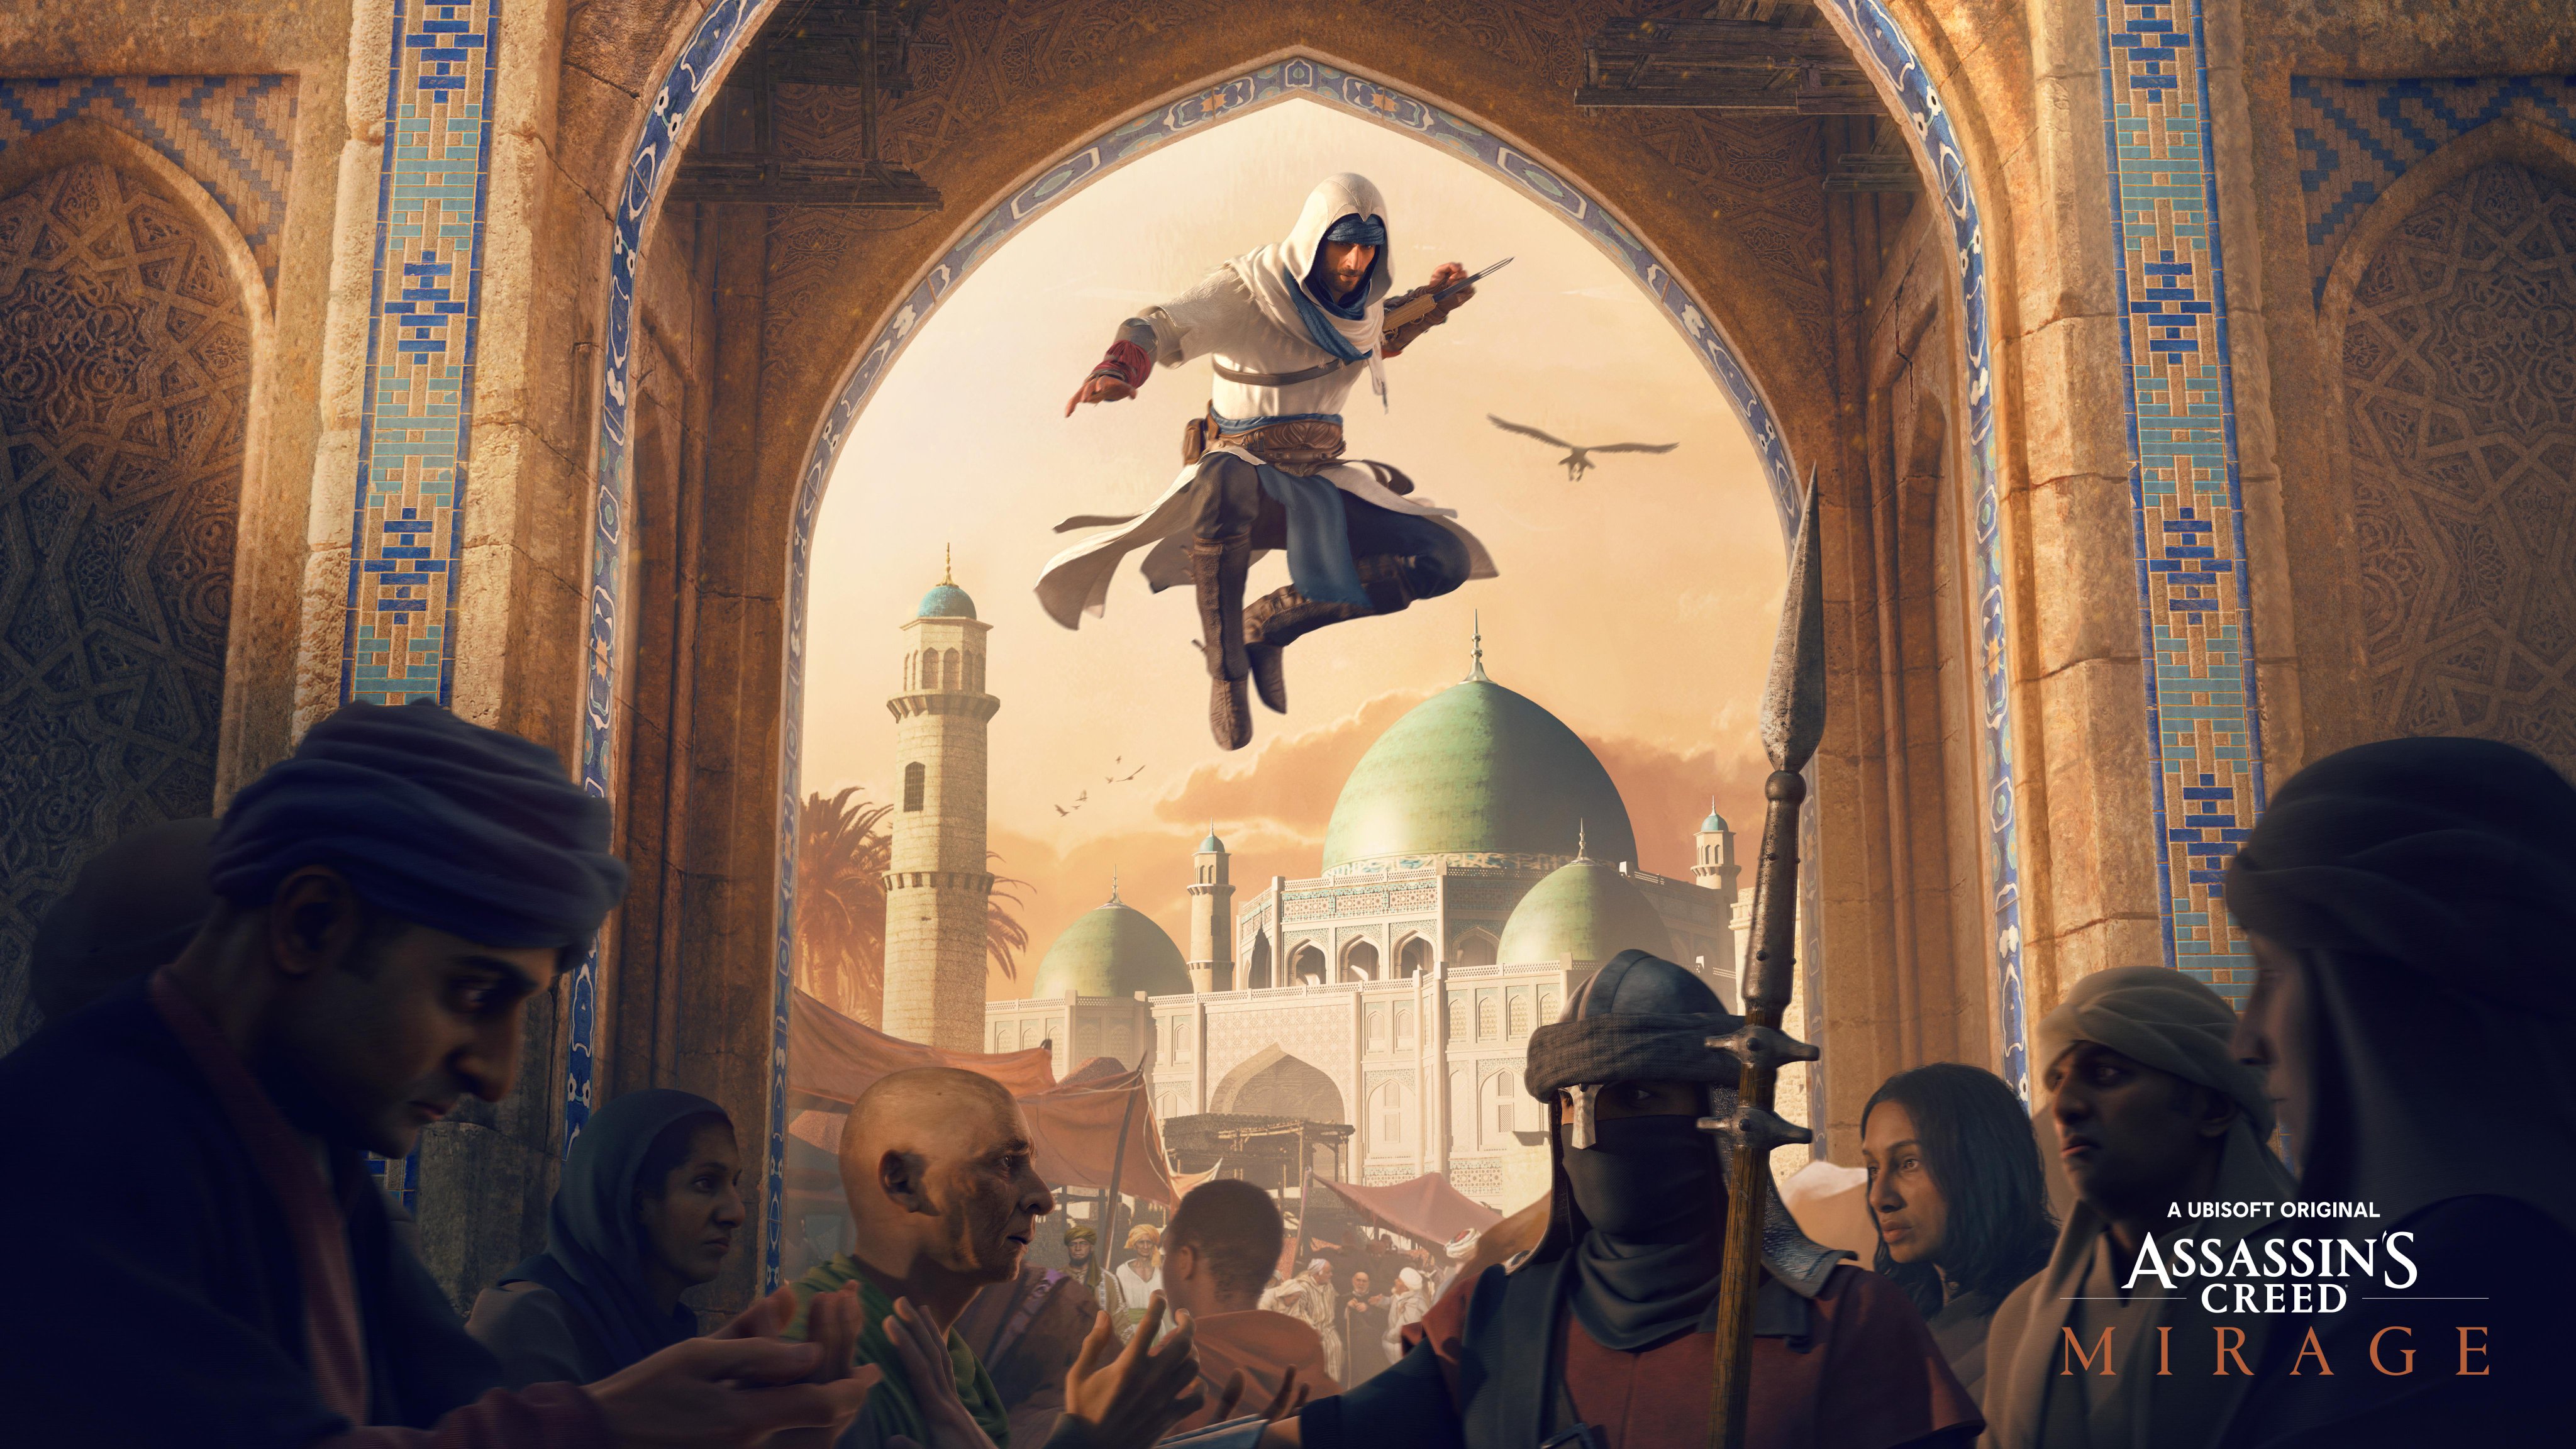 Assassin's Creed Mirage Reportedly Targeting August 2023 Release Date